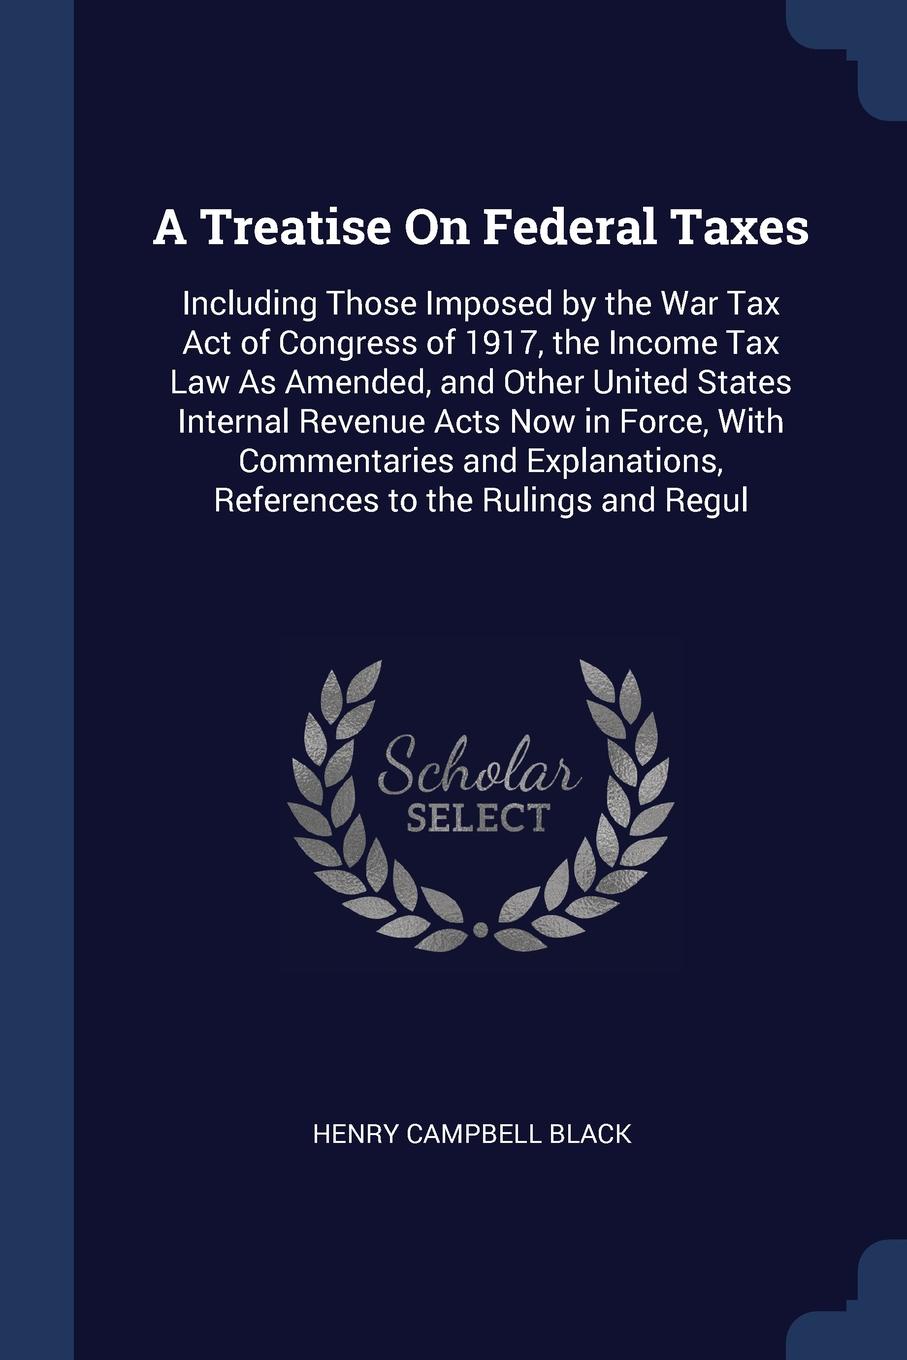 A Treatise On Federal Taxes. Including Those Imposed by the War Tax Act of Congress of 1917, the Income Tax Law As Amended, and Other United States Internal Revenue Acts Now in Force, With Commentaries and Explanations, References to the Rulings a...